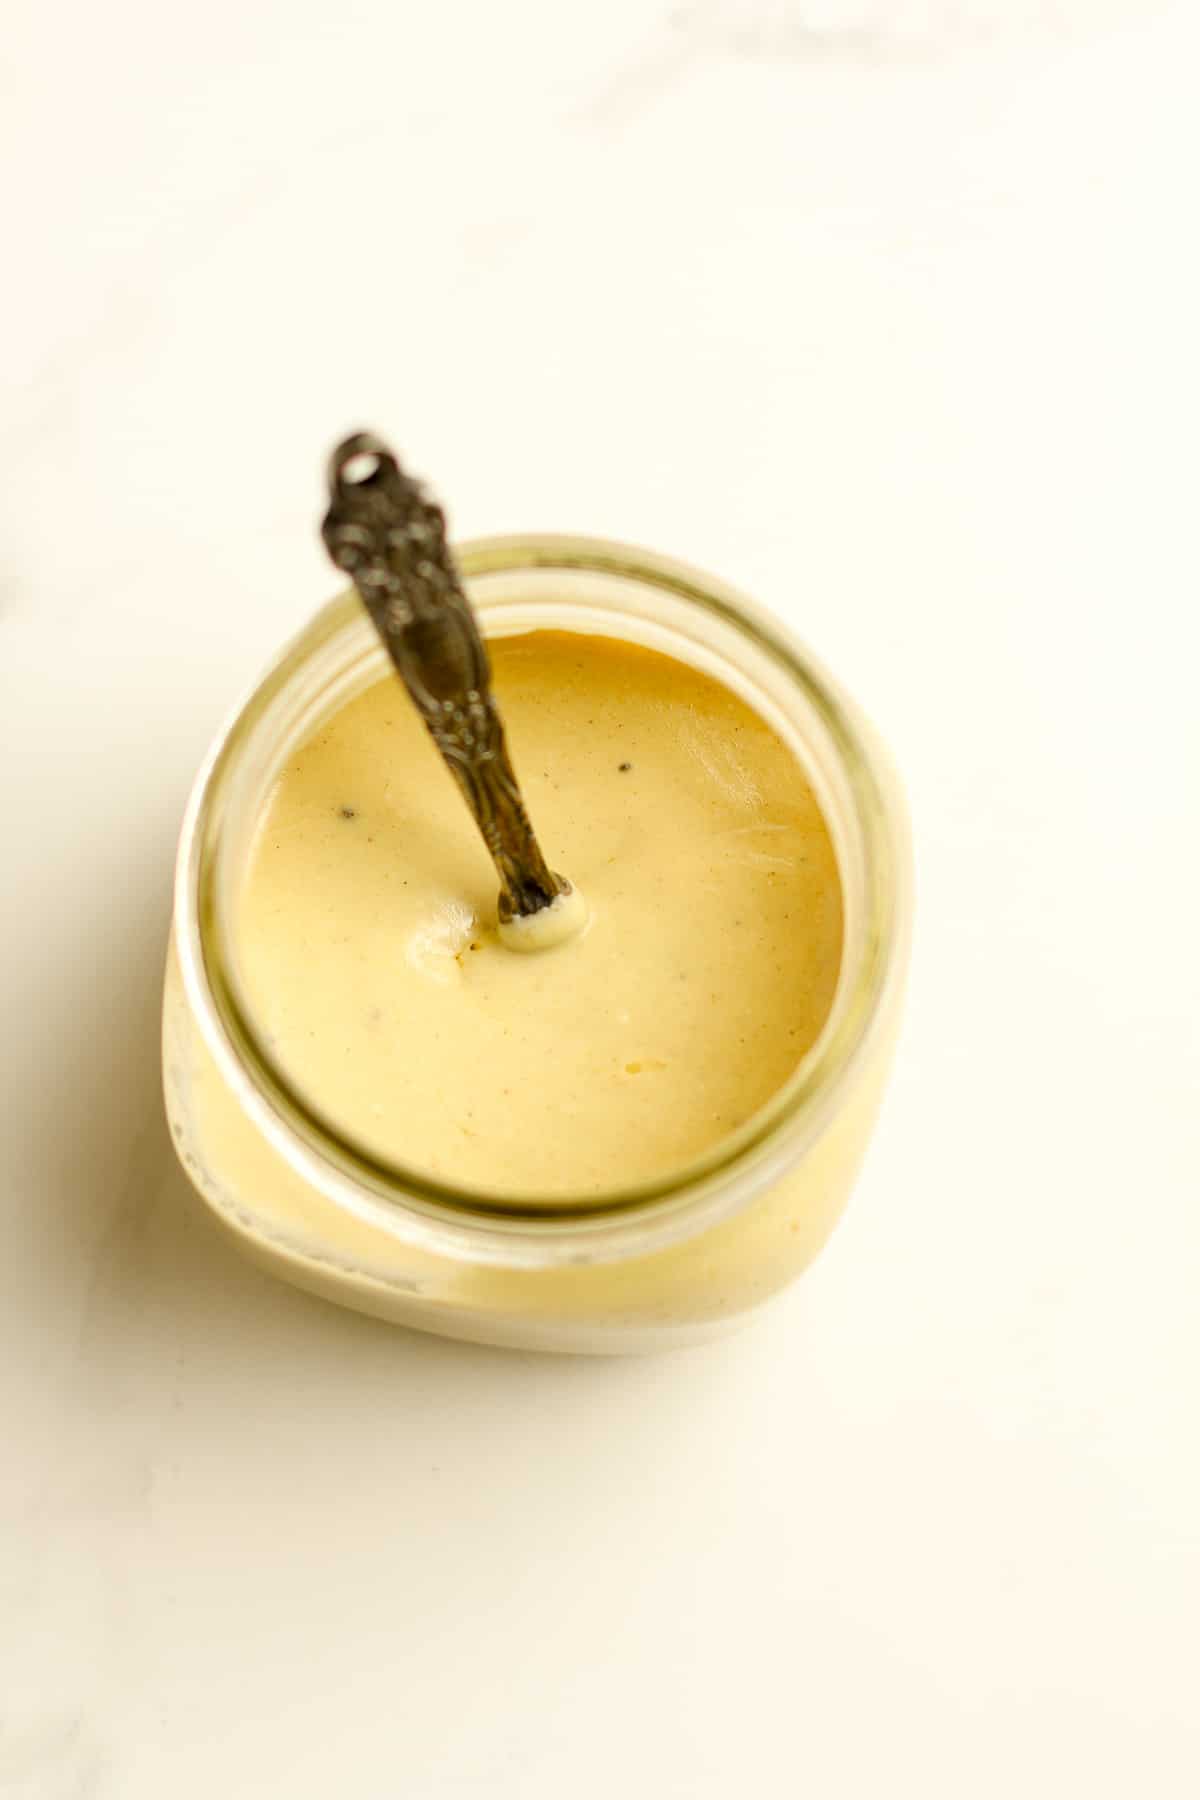 A jar of the light honey mustard with a tablespoon.